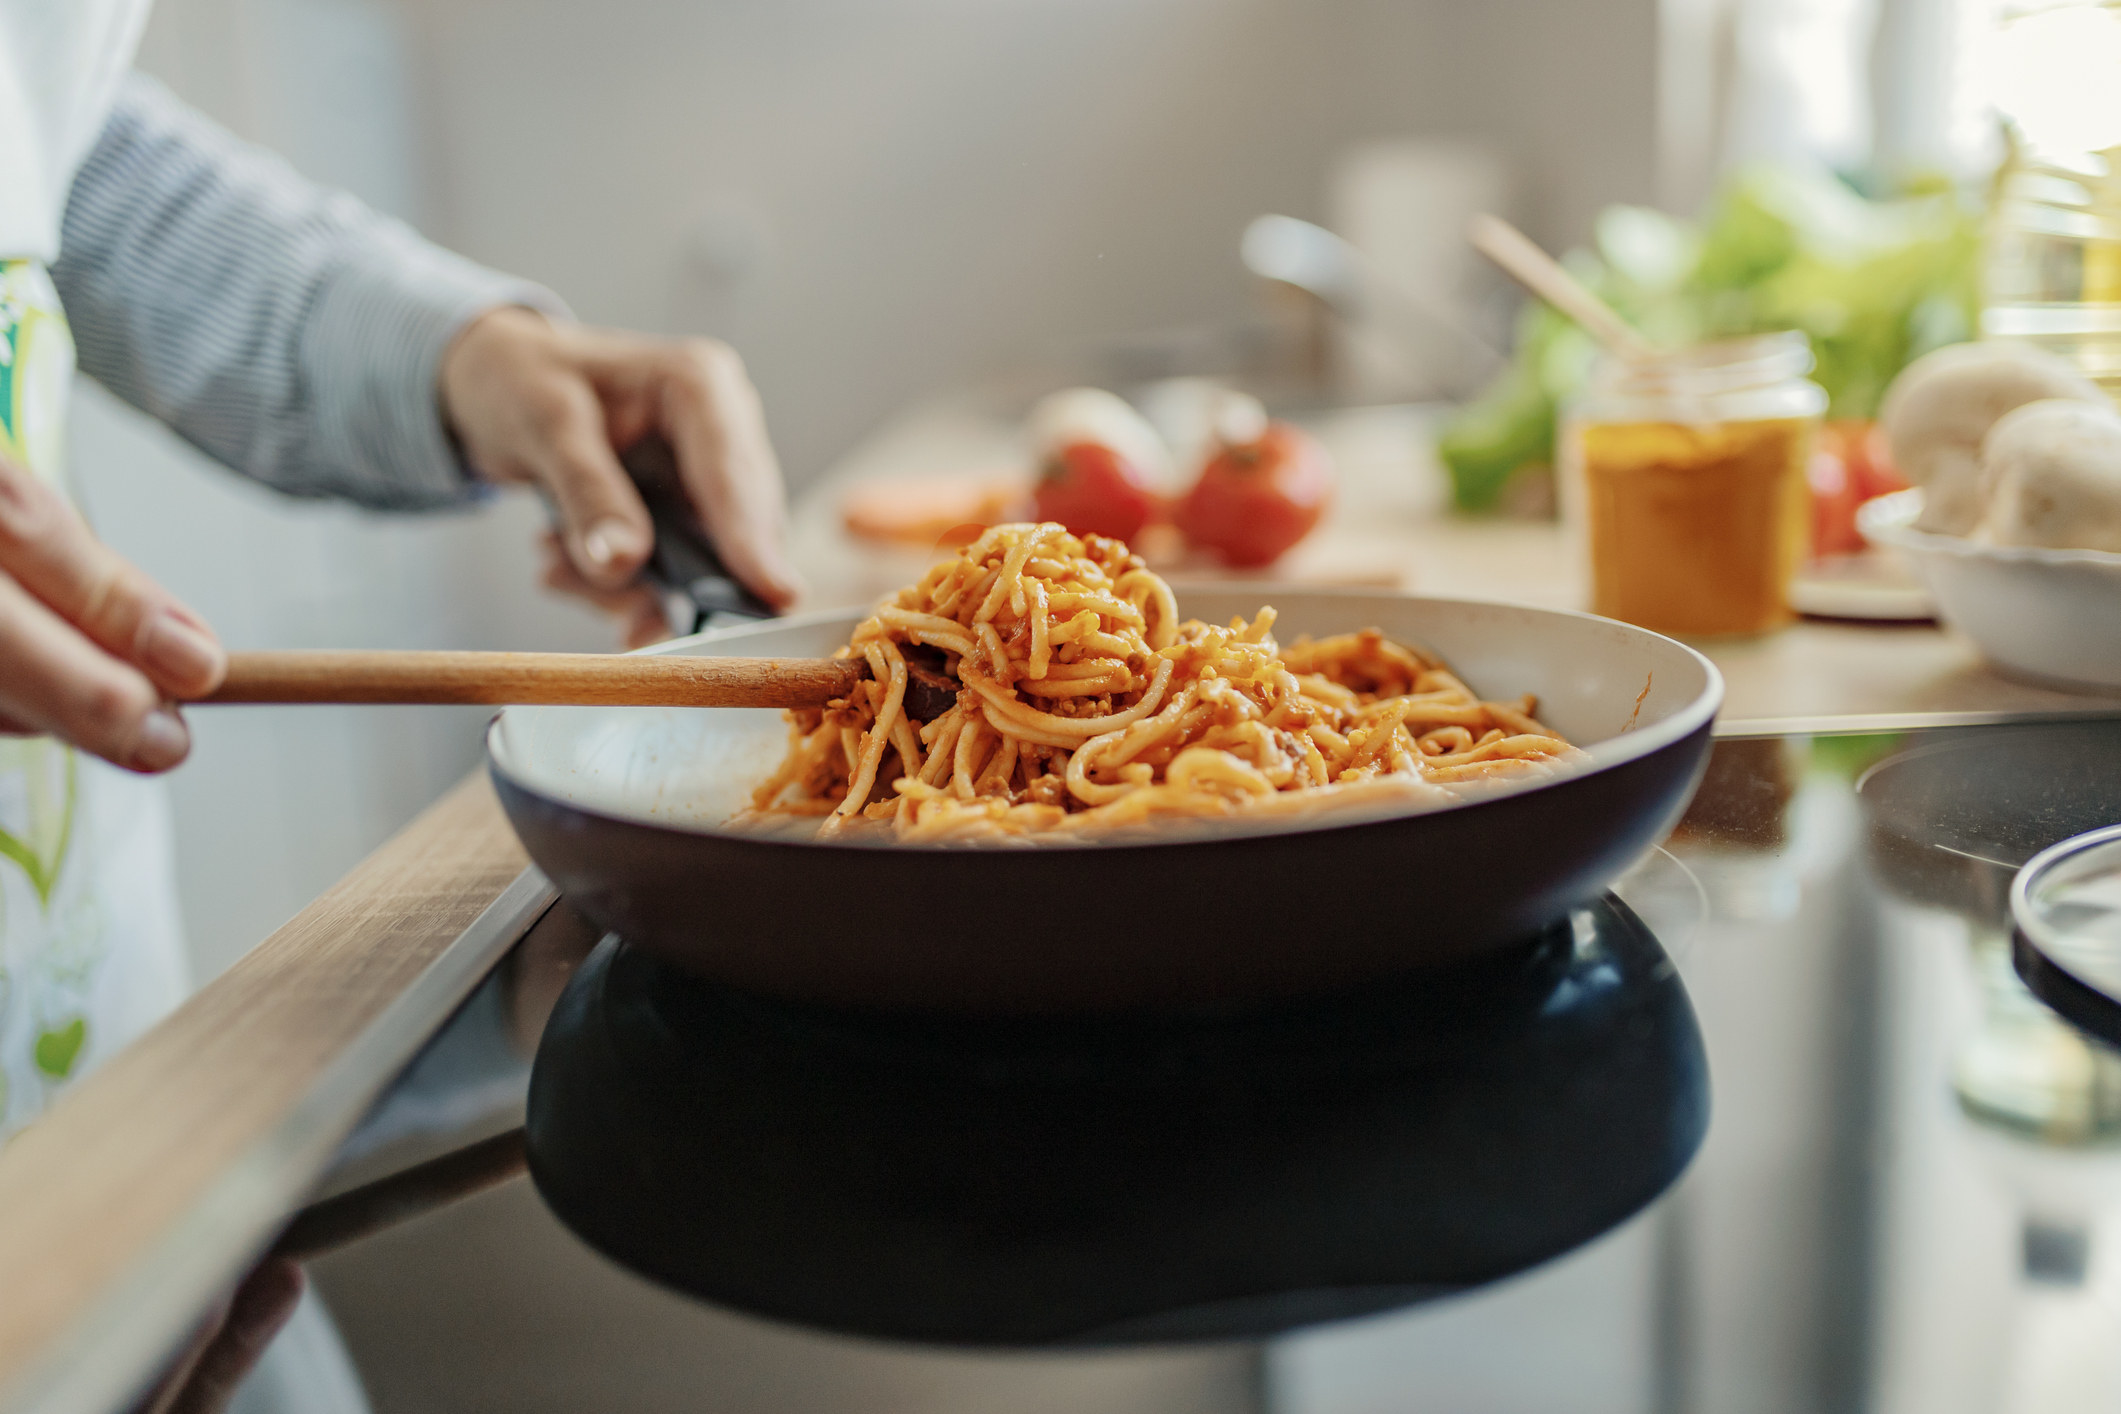 Spaghetti with red sauce in a skillet.